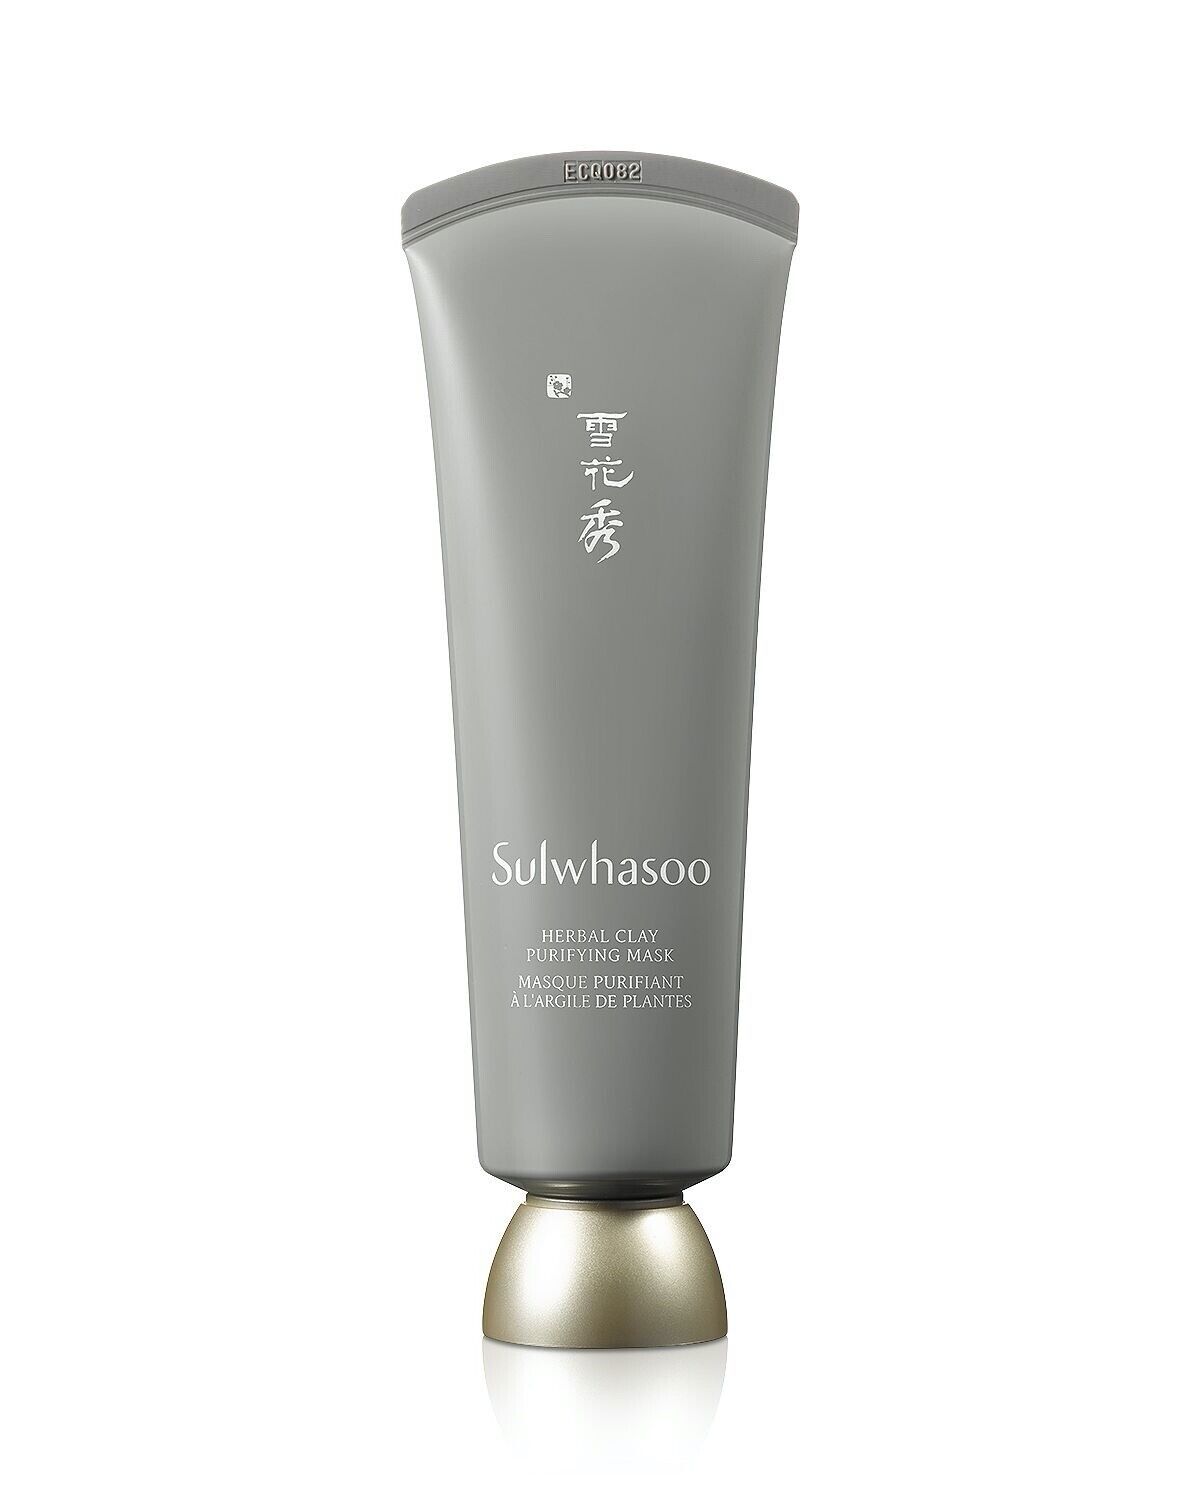 Sulwhasoo Herbal Clay Purifying Mask 120ml Pores Calm Skin Soothing Care Mask  - $37.61